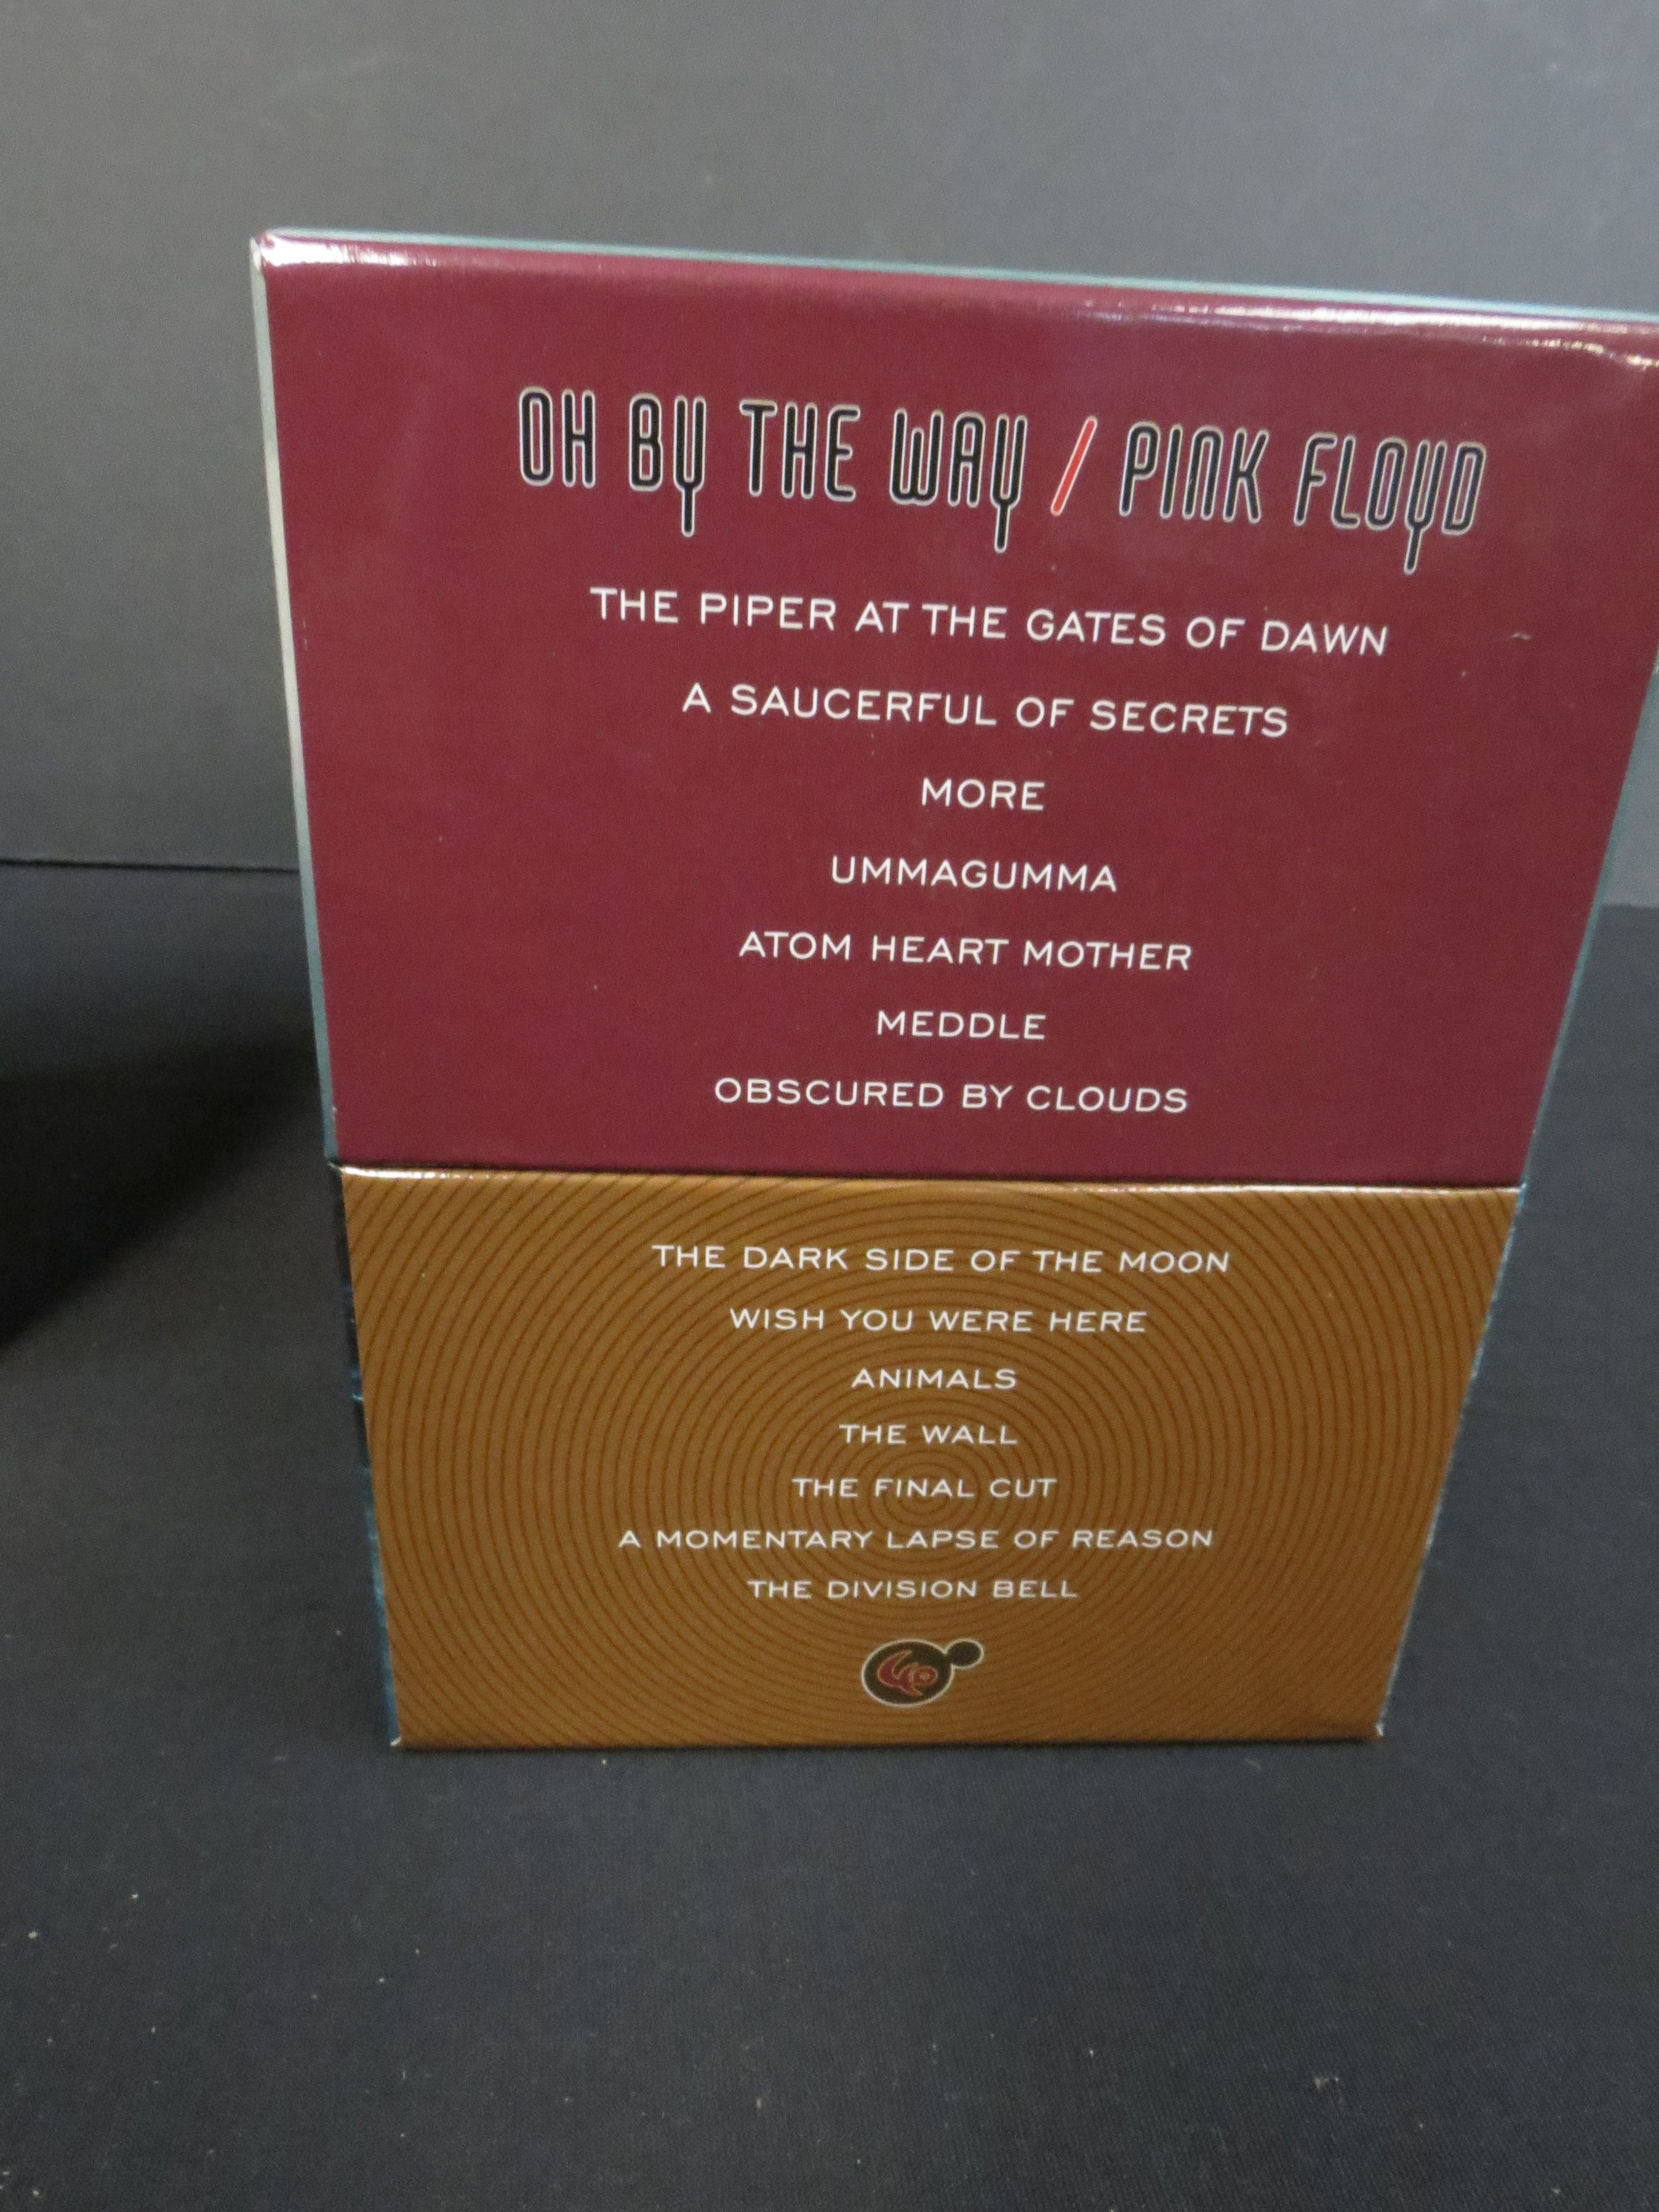 CDs - Pink Floyd Oh By The Way Box Set, complete - Image 4 of 5